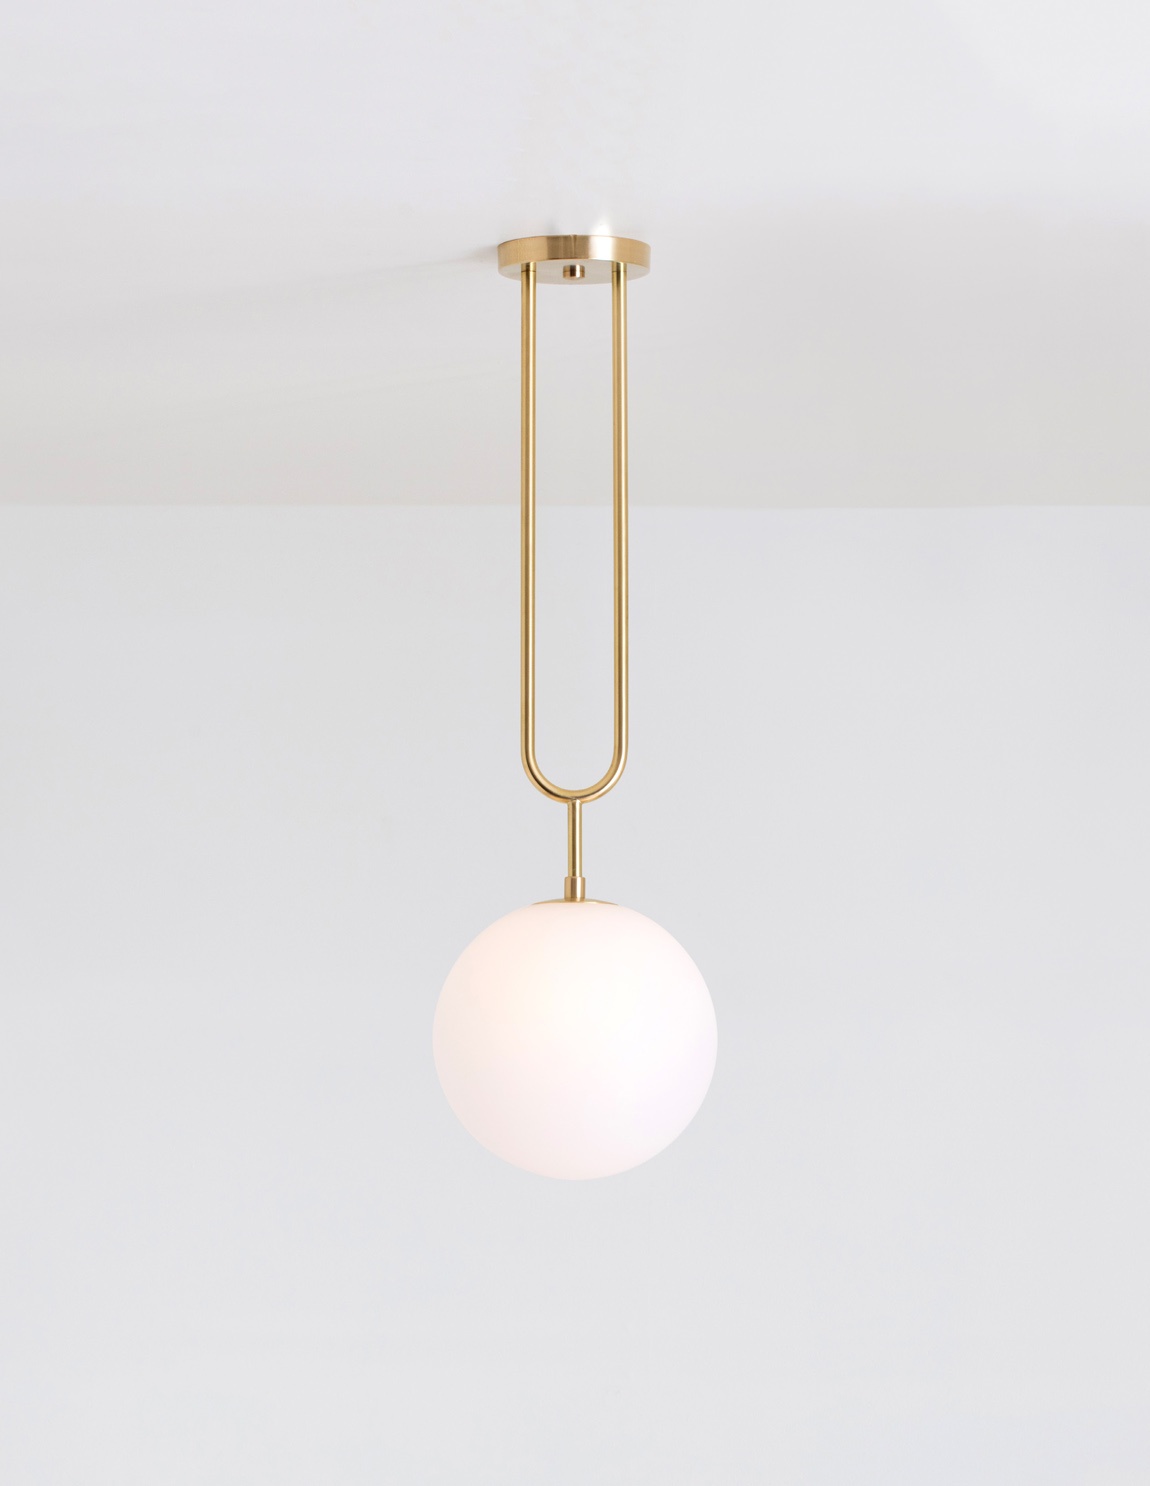 DSHOP welcomes Current lighting collection!